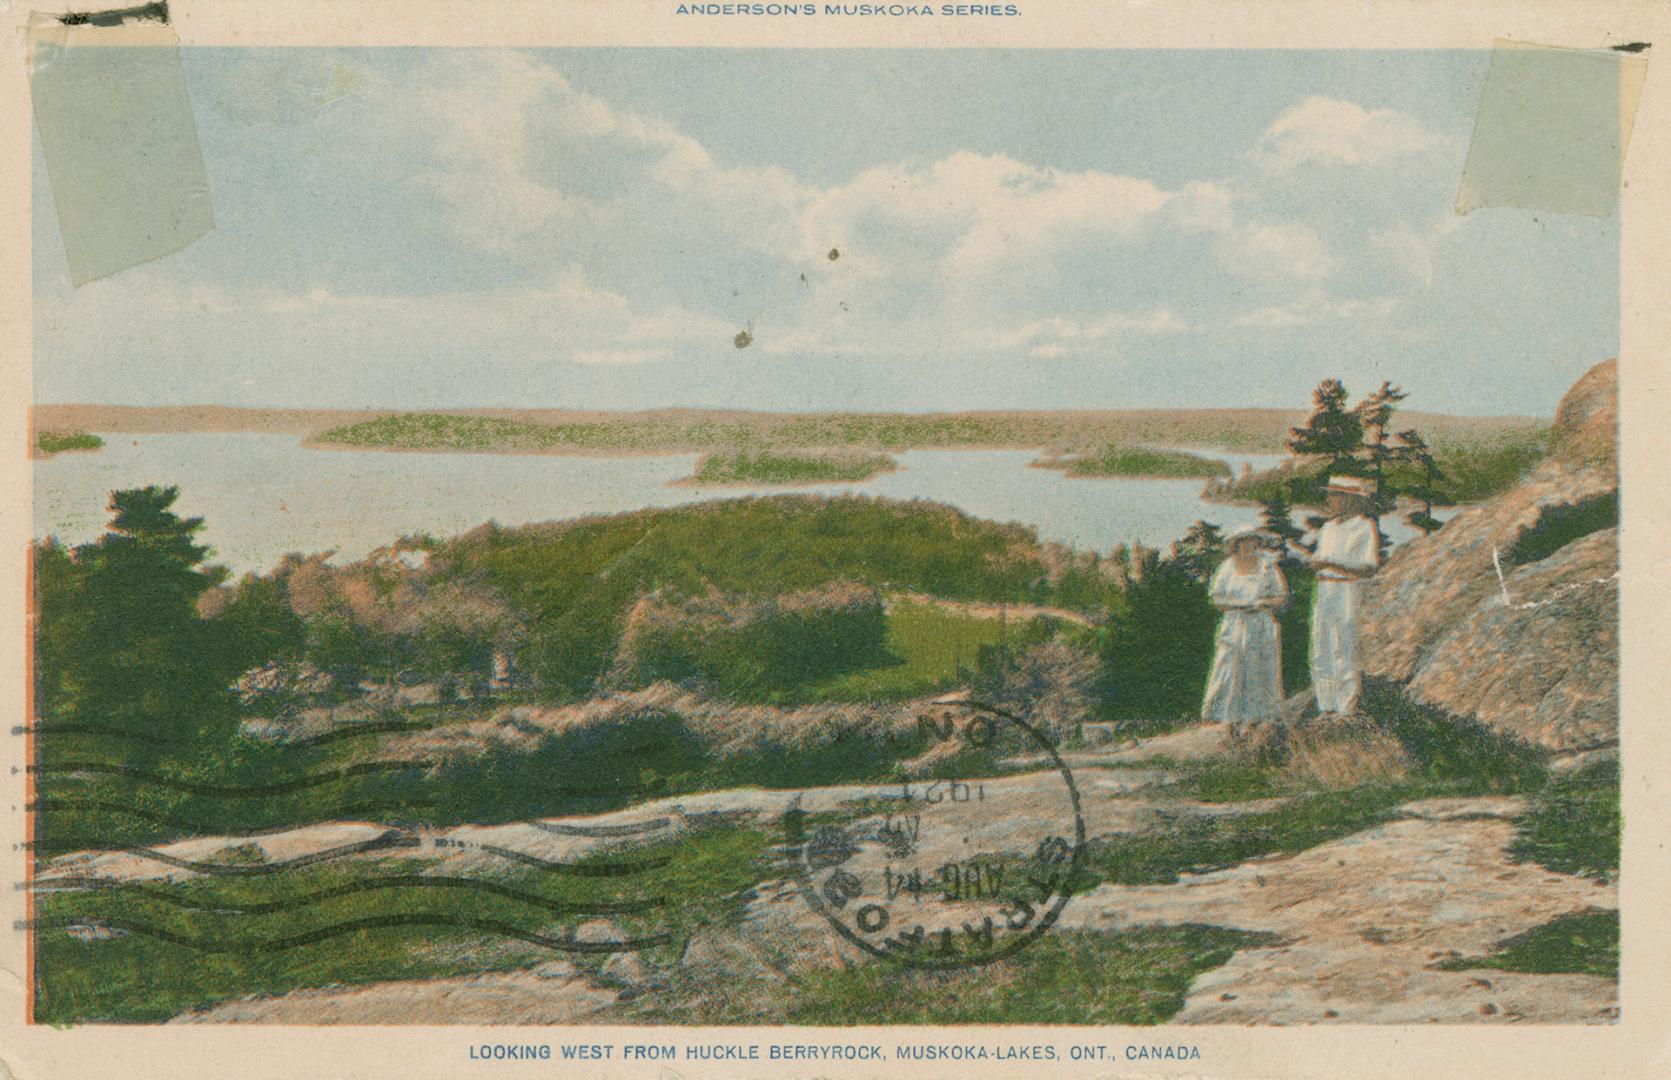 A man and a woman standing on a rock surface looking out over a vista of trees and lake.